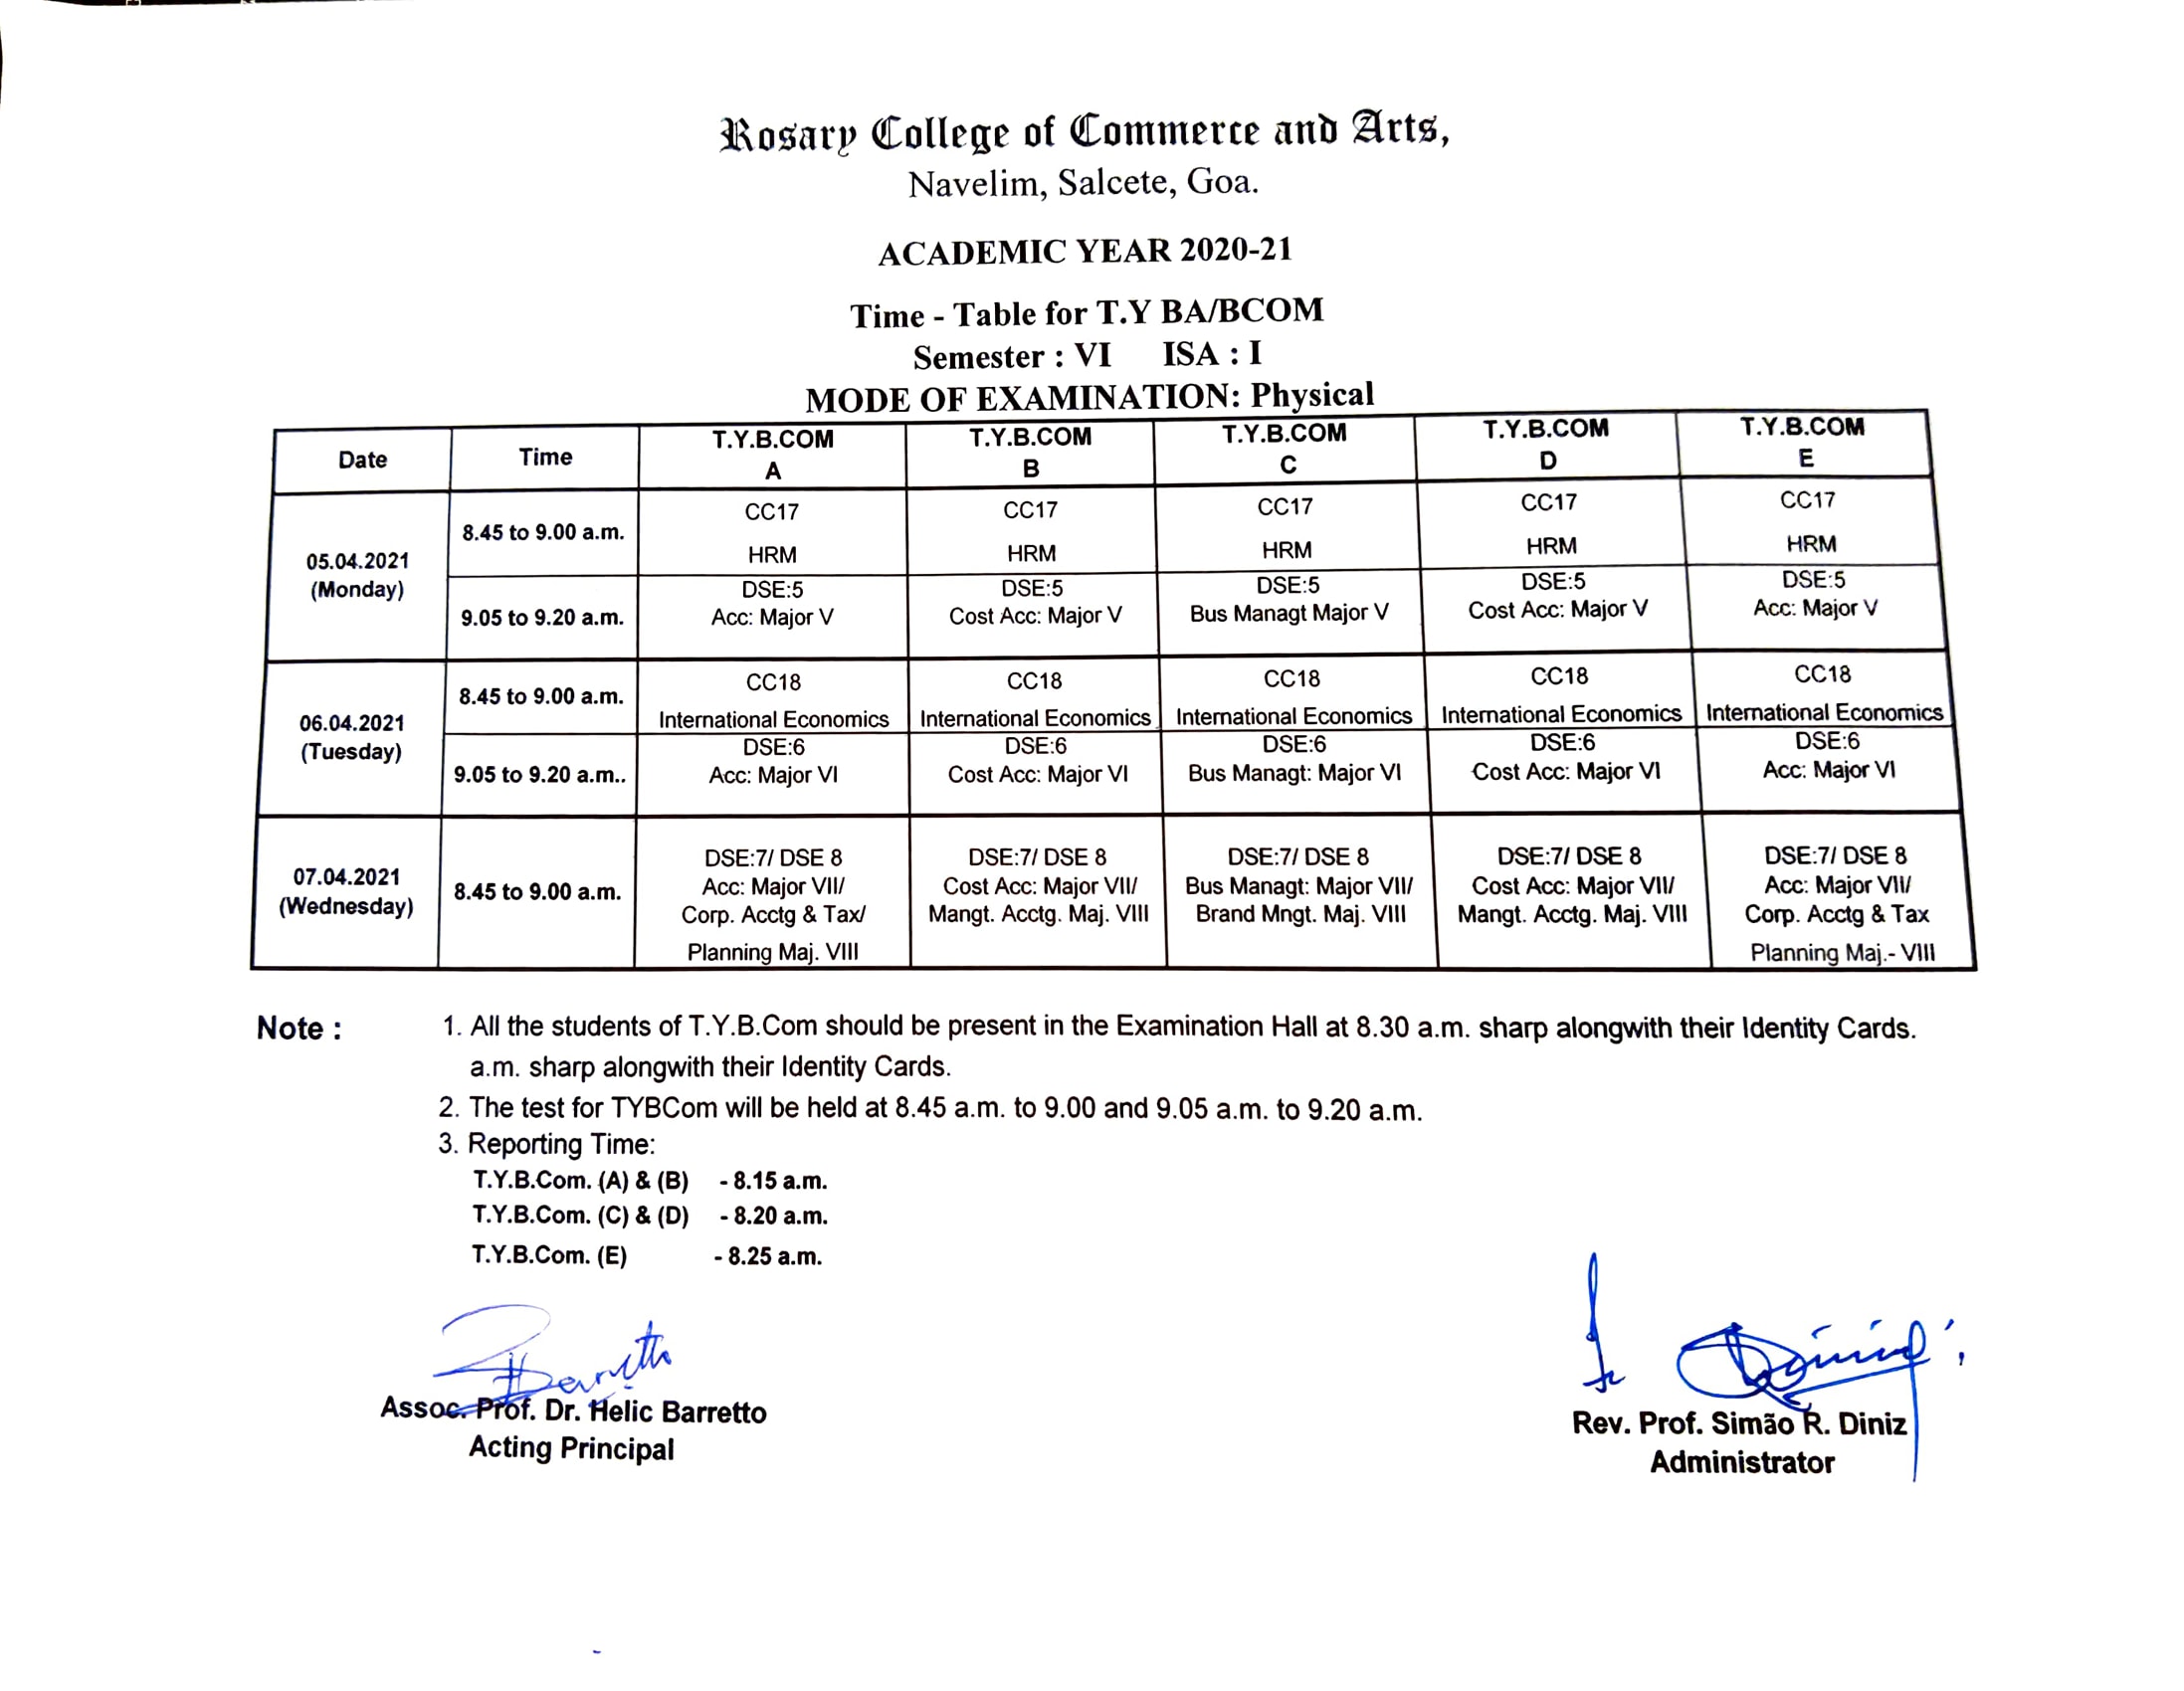 B.A / B.COM TUESDAY TIMETABLE – Rosary College of Commerce and Arts